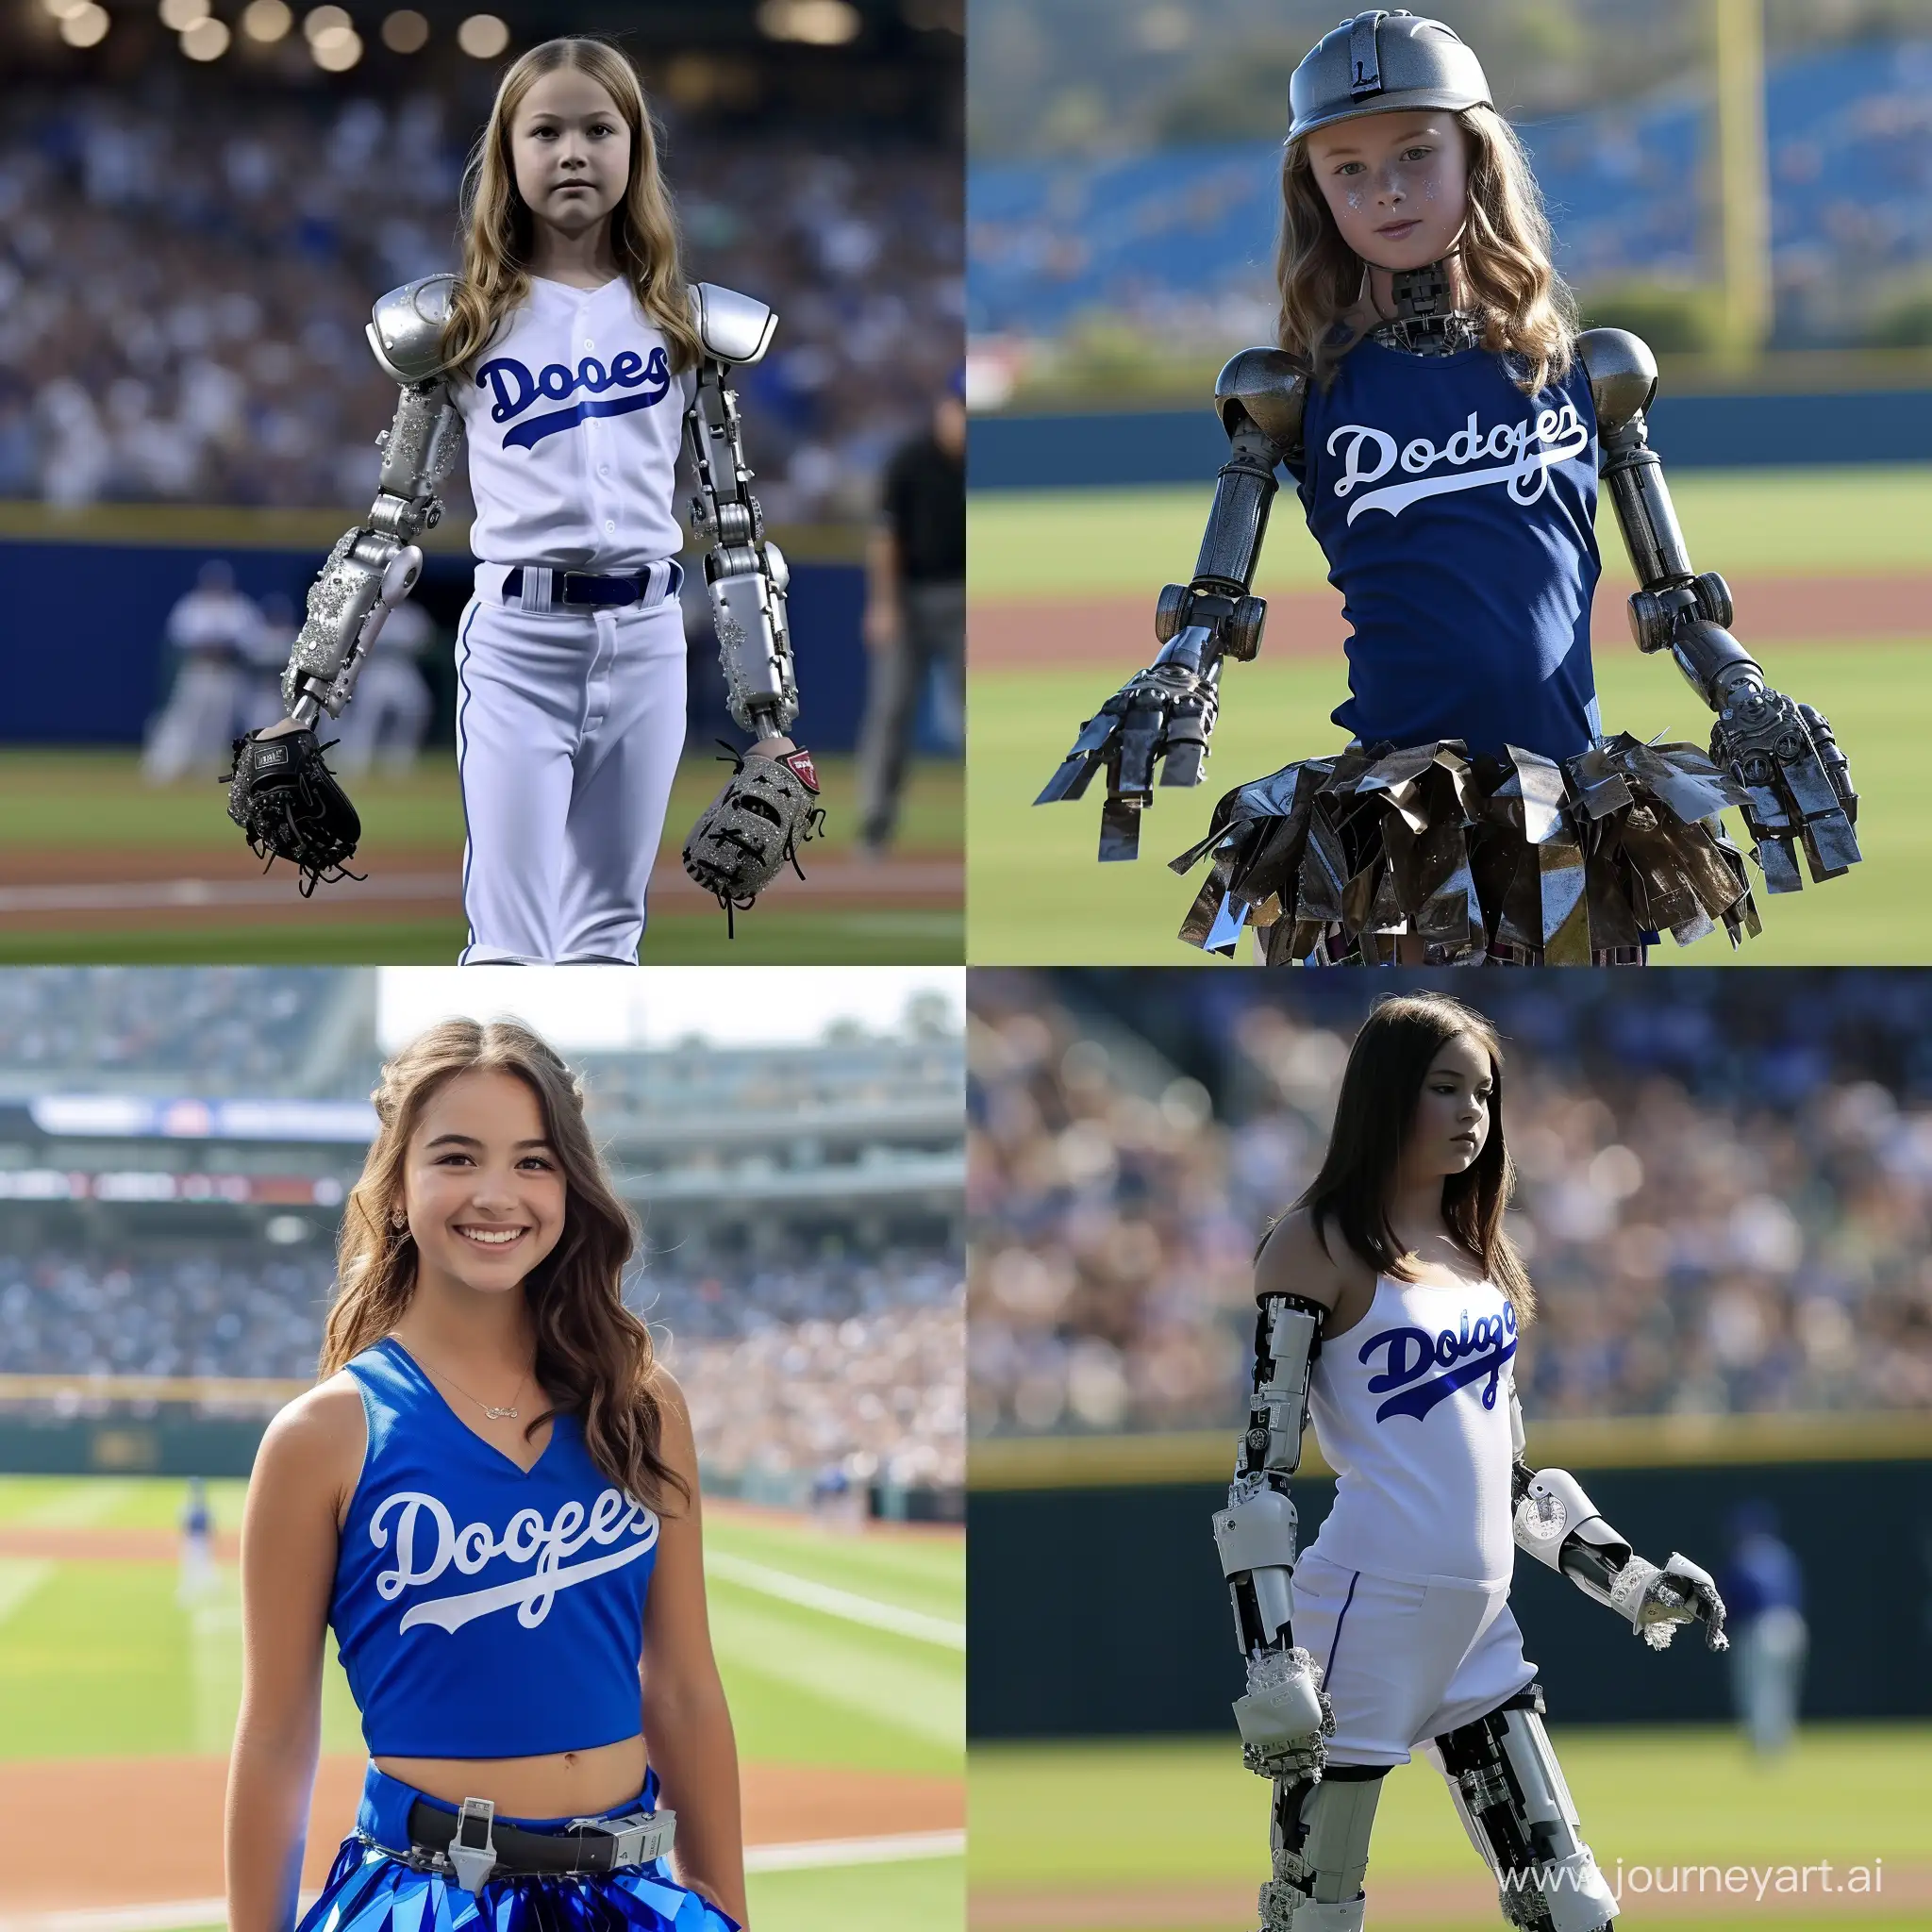 Los Angeles Dodgers 13-14 year old cheerleader, turns out to be a robot, malfunctioning